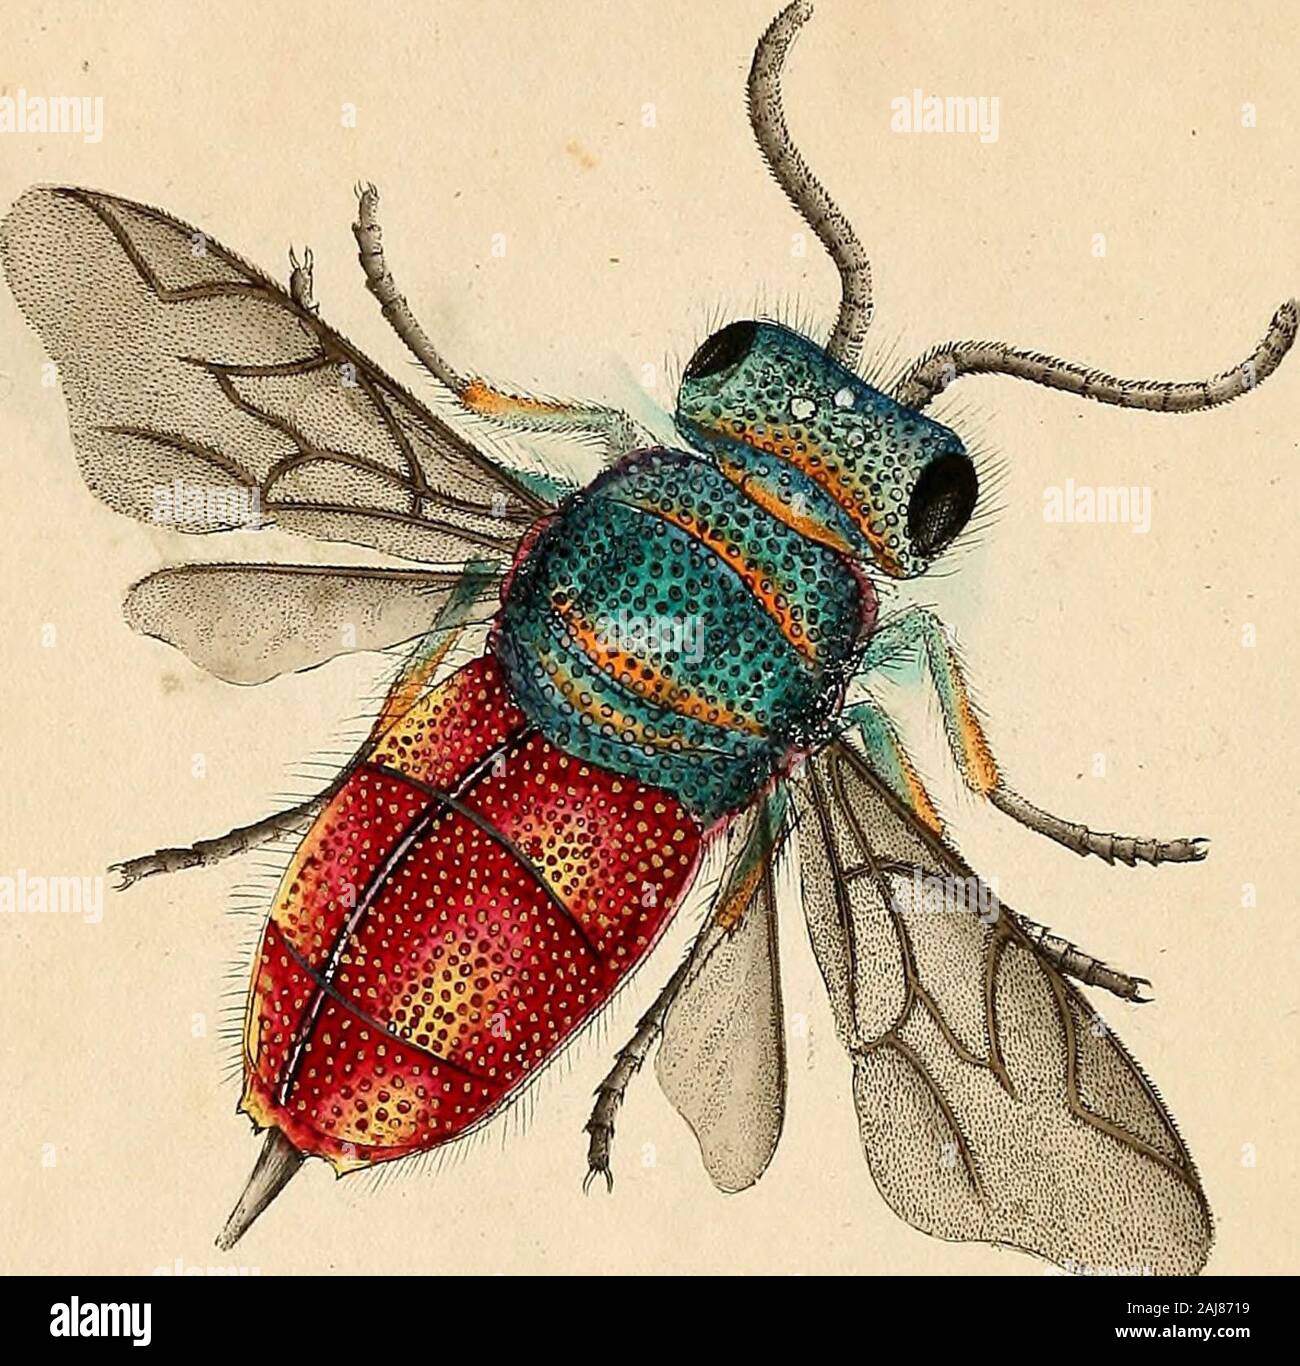 The natural history of British insects : explaining them in their several  states, with the periods of their transformations, their food, oeconomy, &c  together with the history of such minute insects as